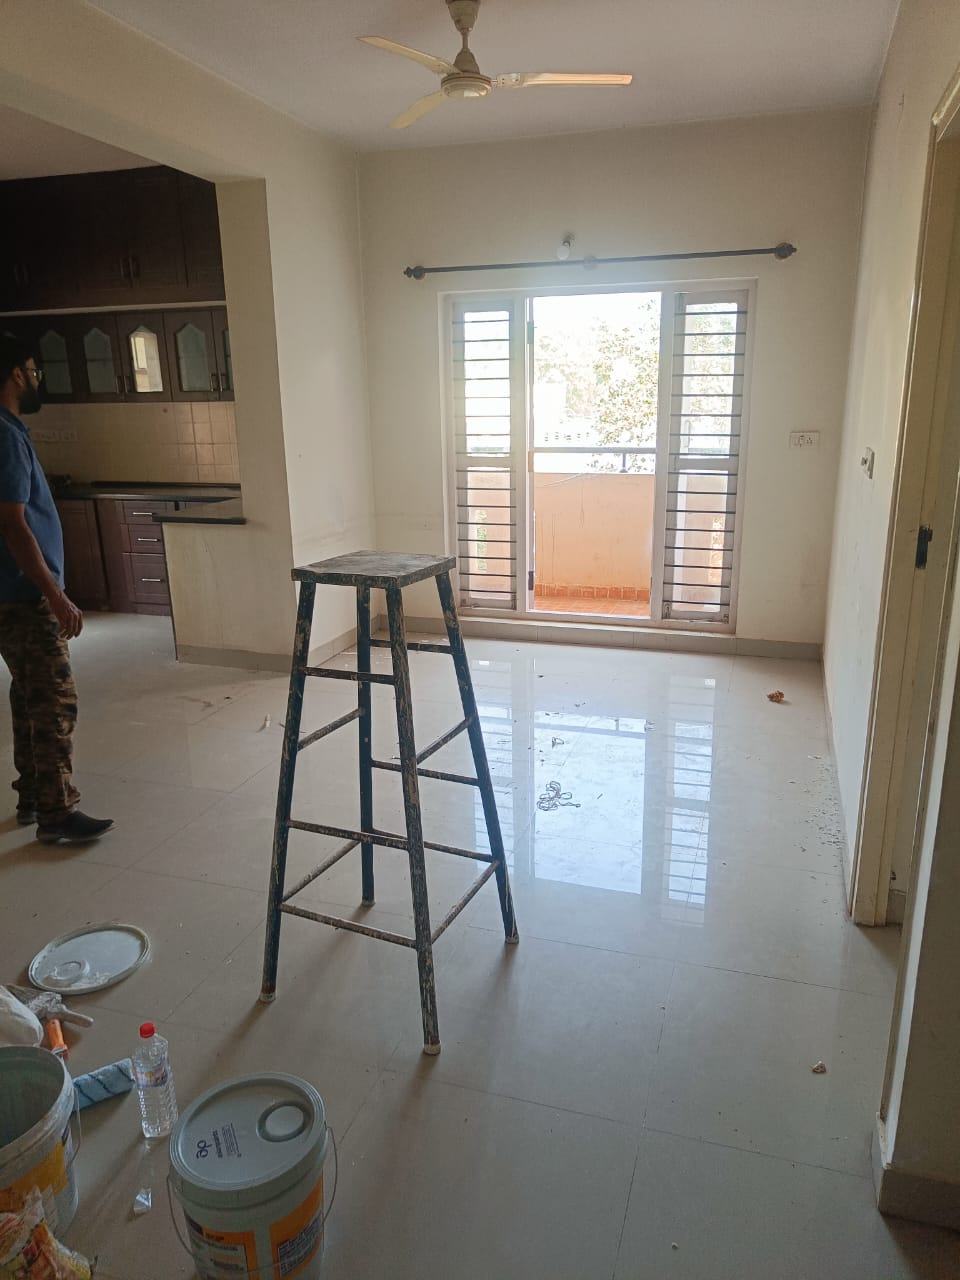 2 BHK Residential Apartment for Lease Only at JAML2 - 1861 in RK Hegde Nagar